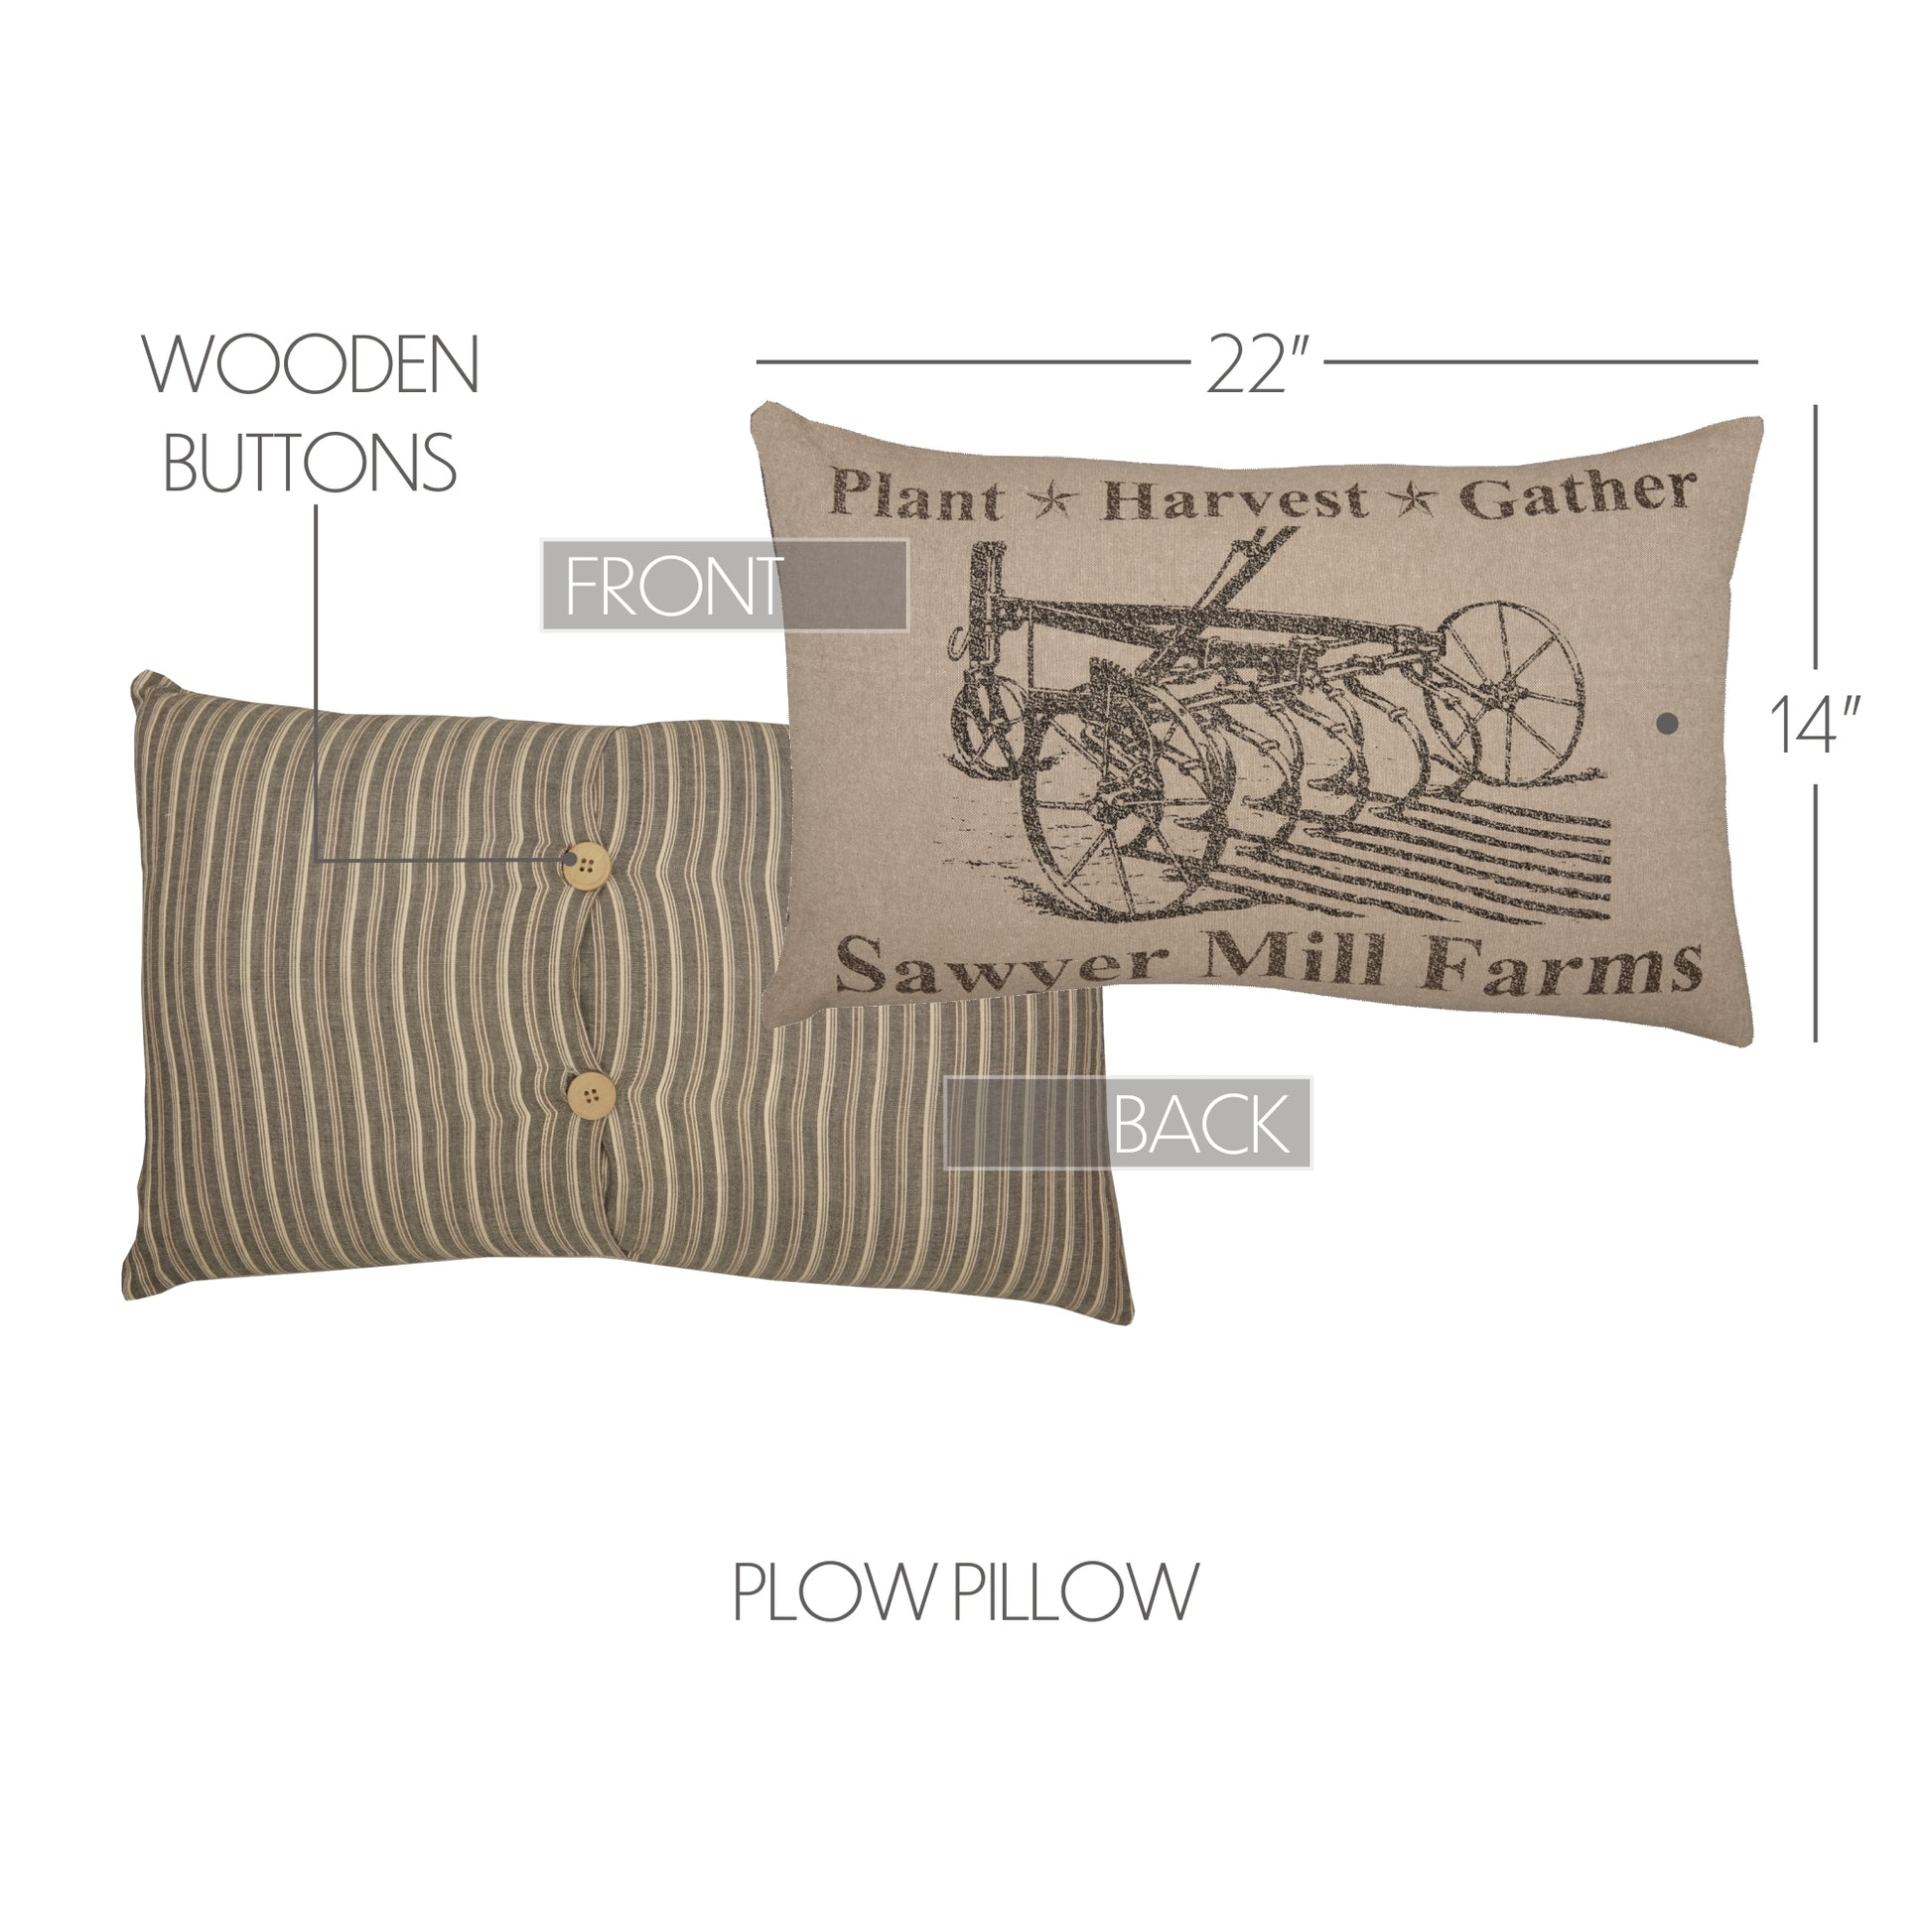 56762-Sawyer-Mill-Charcoal-Plow-Pillow-14x22-image-1